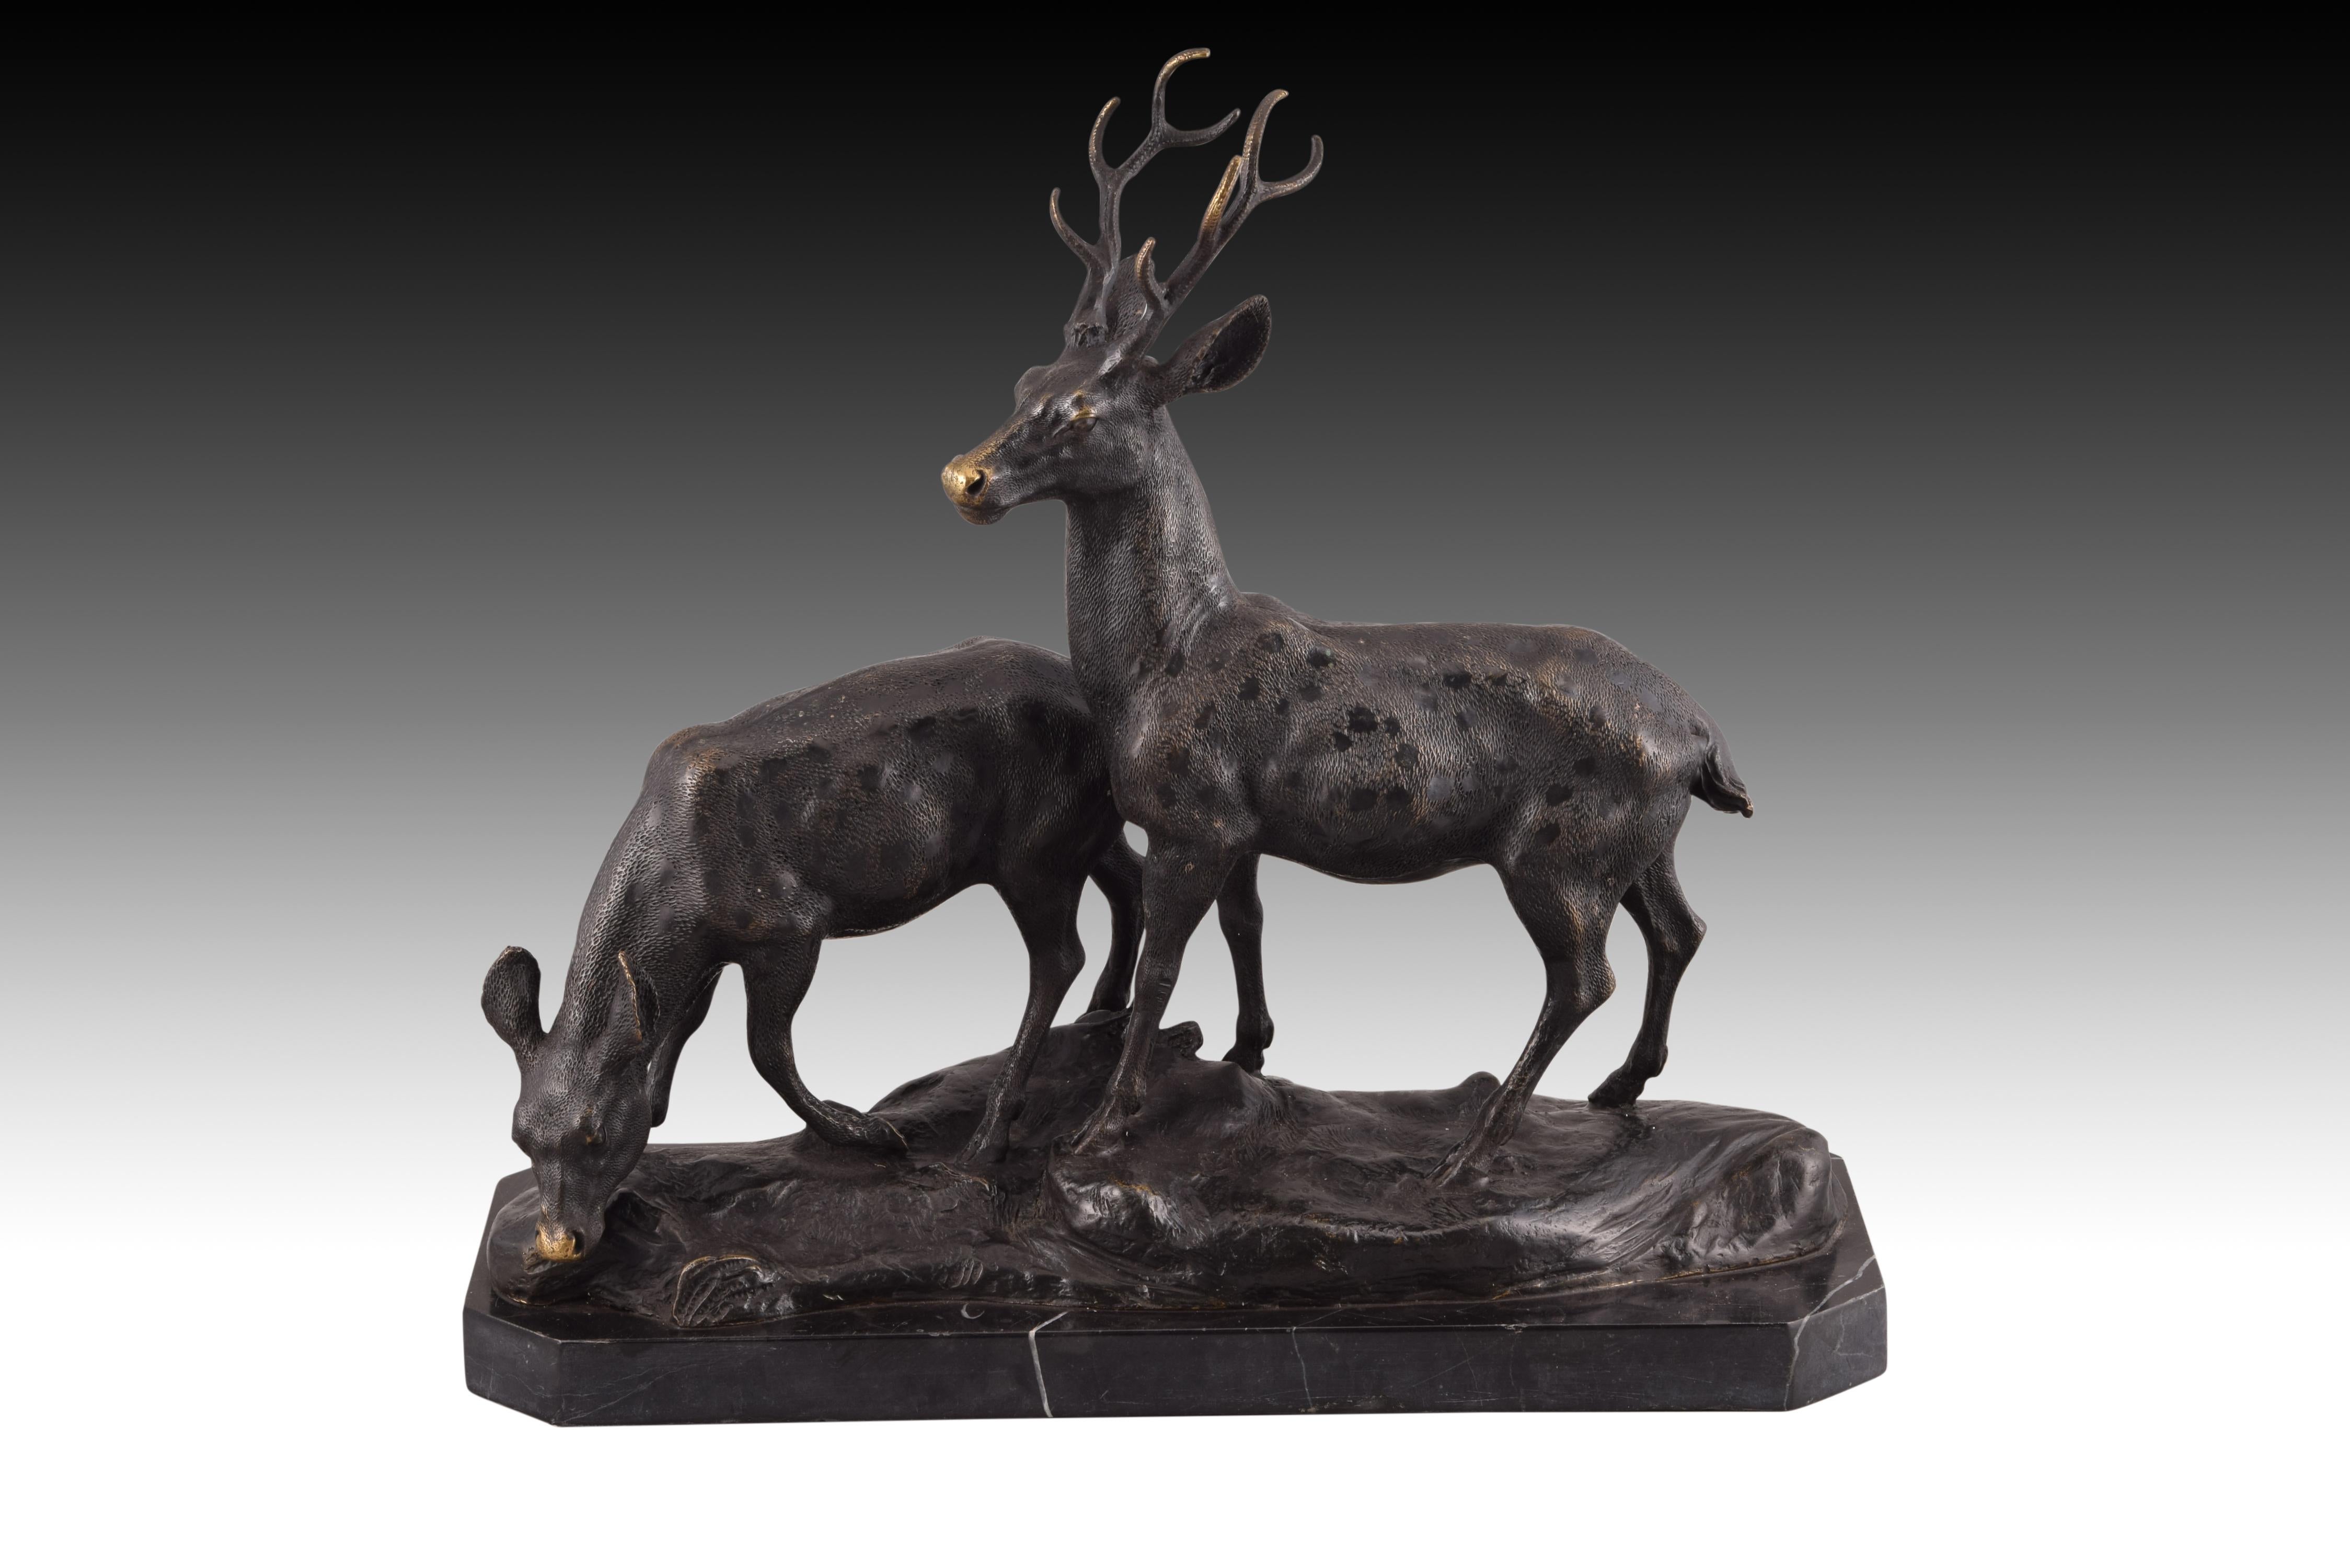 On the base of veined marble is a rock formation, already in bronze, to set the figures. The male deer appears standing, attentive, with his head held high, the female lowers her head as if to drink. The detail, the theme, the composition, etc. they